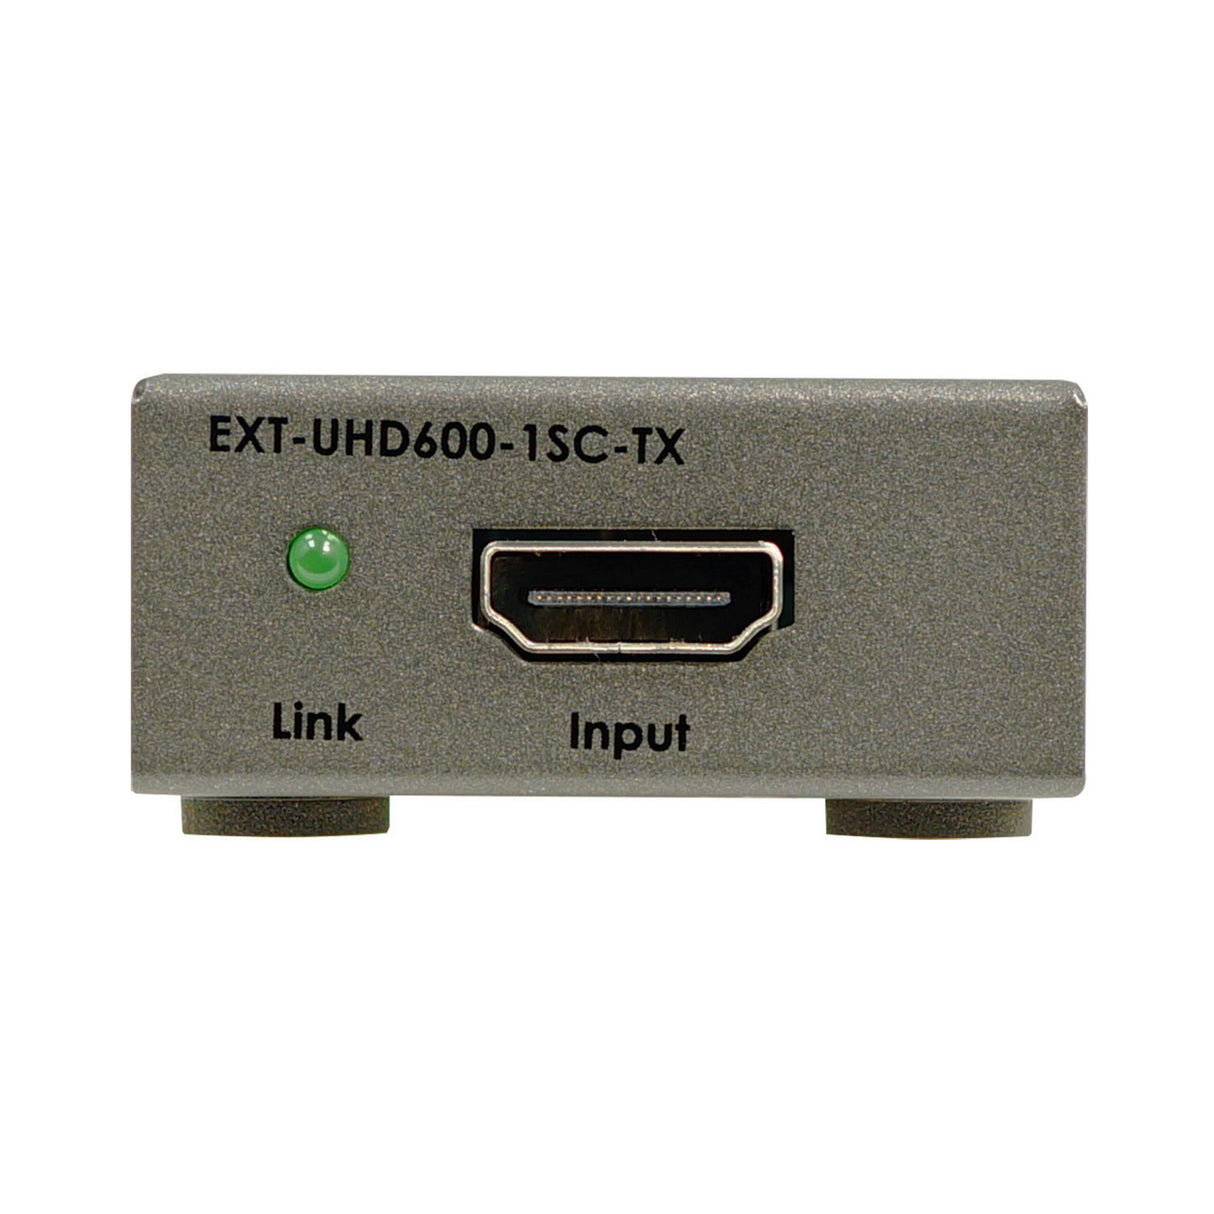 Gefen EXT-UHD600-1SC 4K Ultra HD 600 MHz Extender for HDMI over Fiber-Optic Cable